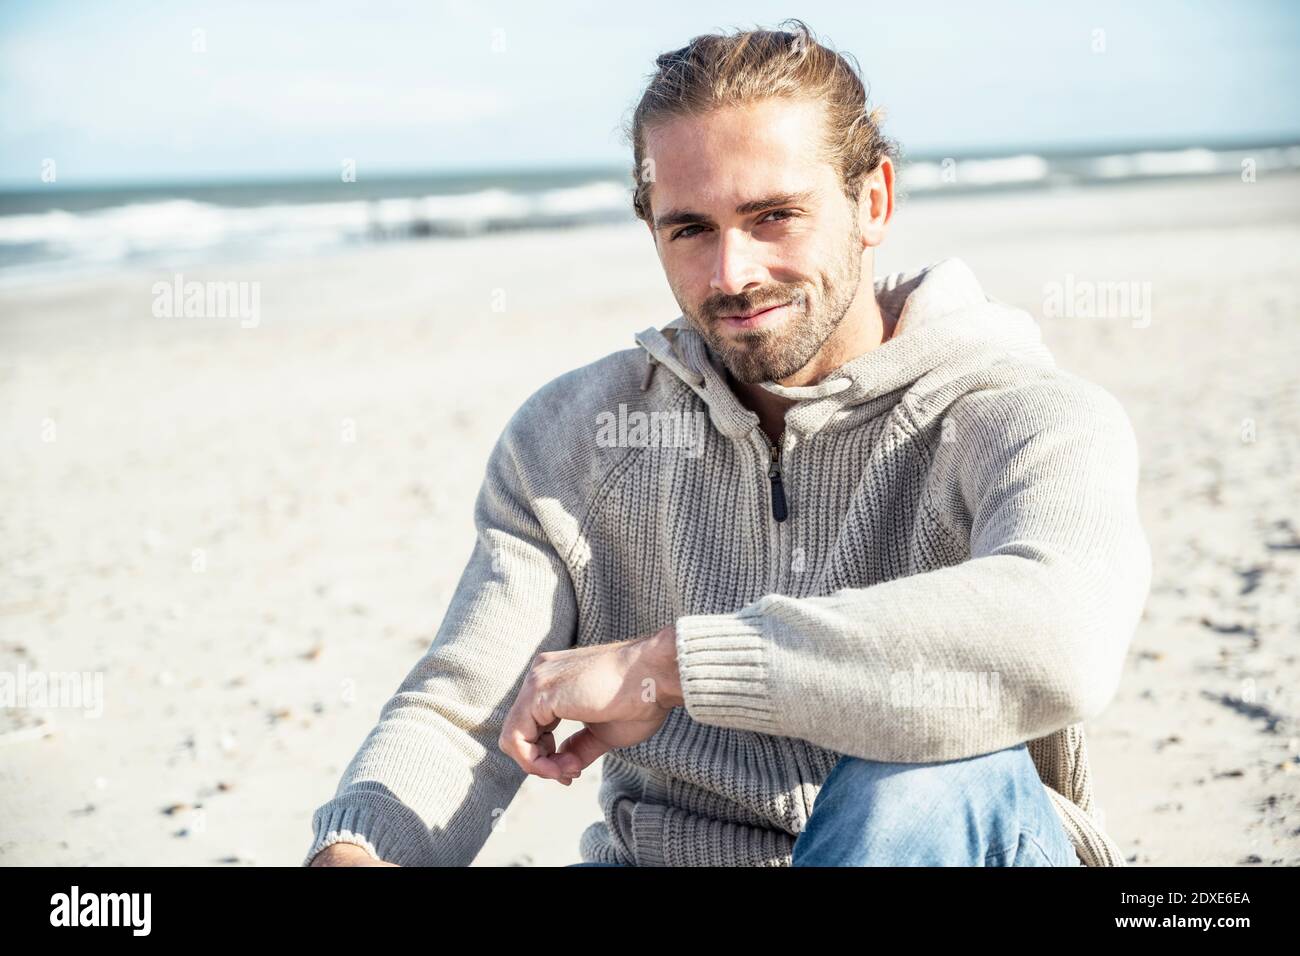 Smiling man sitting with hand on knee at beach Stock Photo